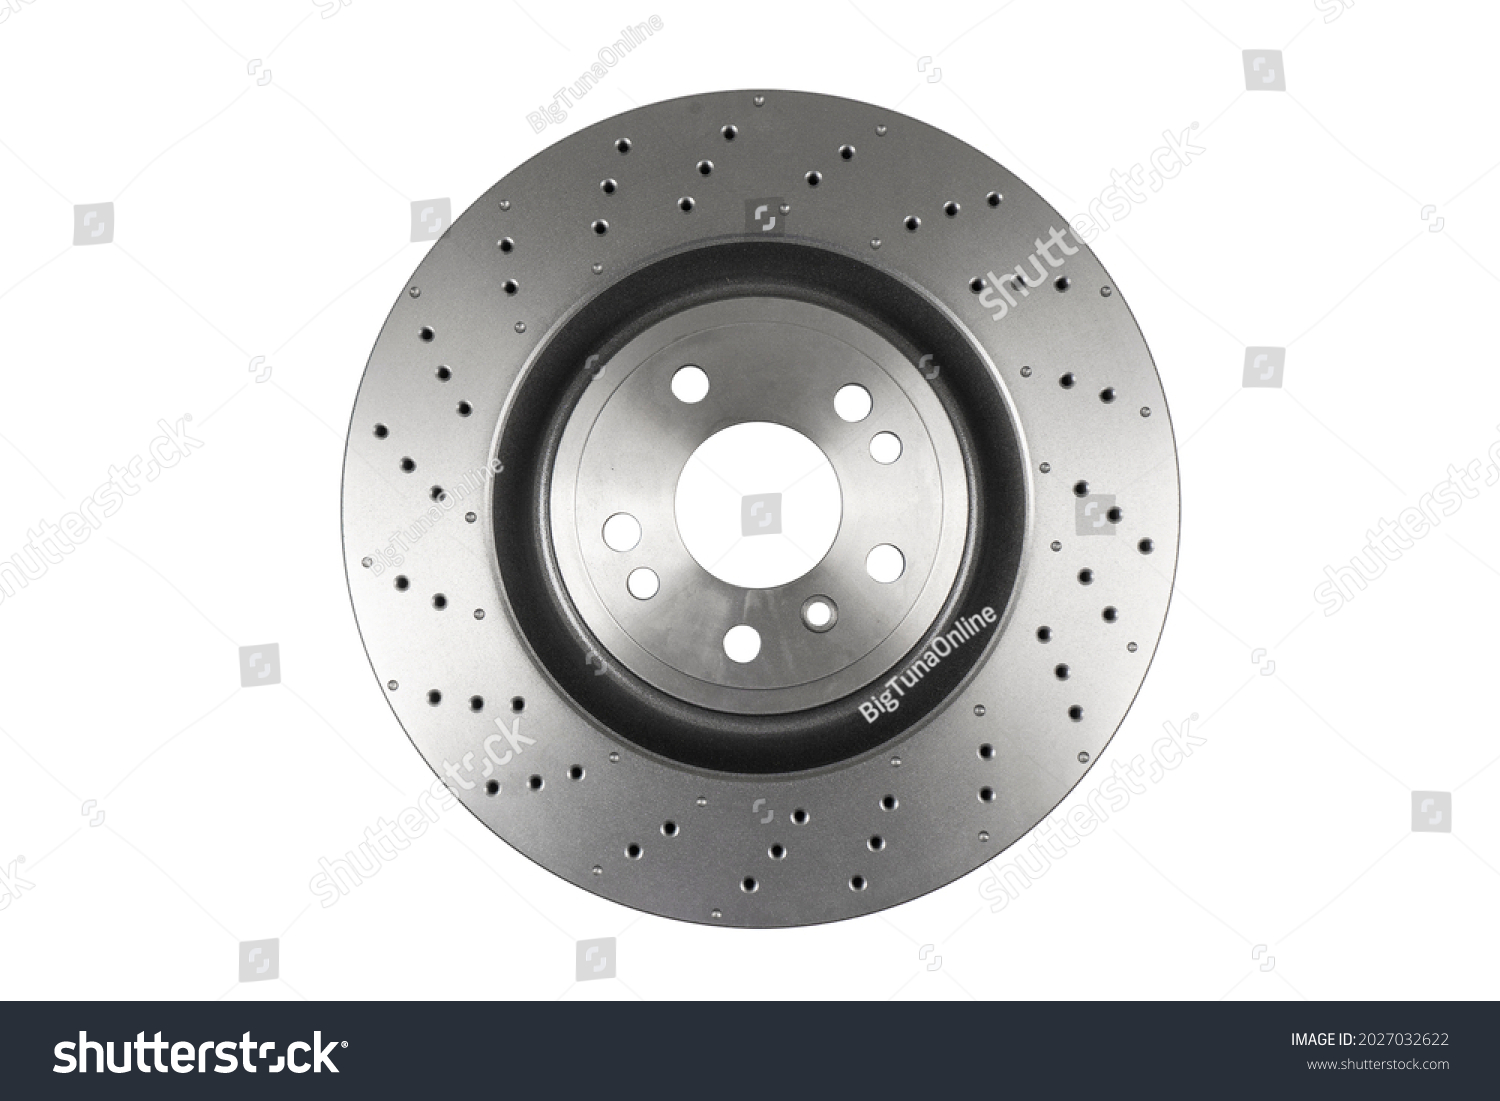 Car brake disc isolated on white background. Auto spare parts. Perforated brake disc rotor isolated on white. Braking ventilated discs. Quality spare parts for car service or maintenance #2027032622